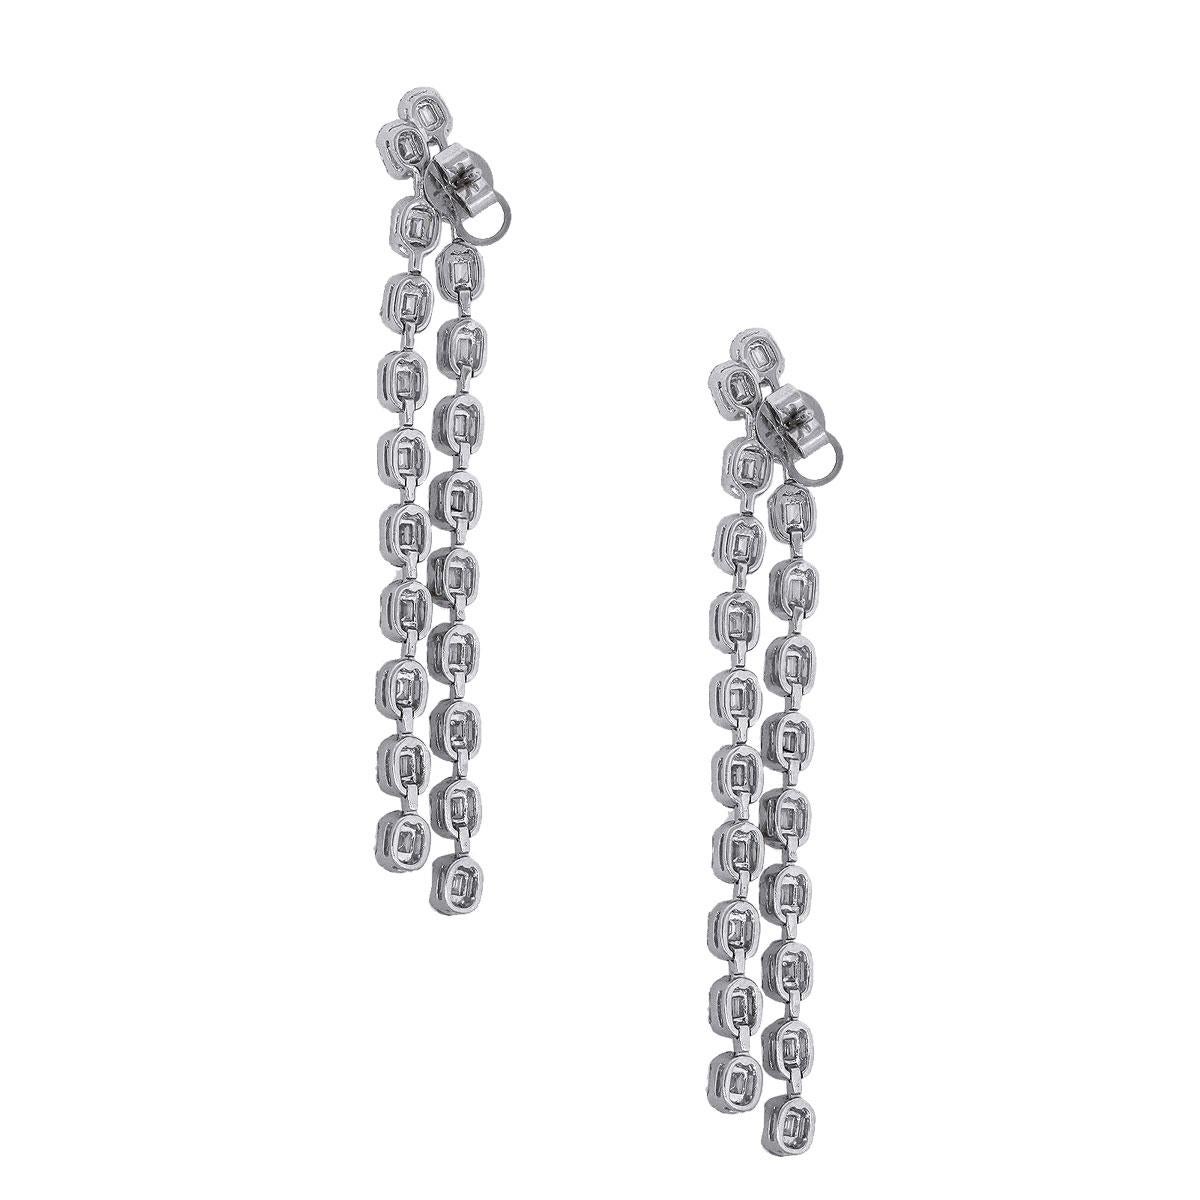 Material: 18k white gold
Style: Drop earrings
Diamond Details: Approximately 7.25ctw baguette cut diamonds. Diamonds are G in color and VS in clarity.
Earring Measurements: 0.60″ x 0.30″ x 3
Total Weight: 18.3g (11.8dwt)
Clasp: Tension